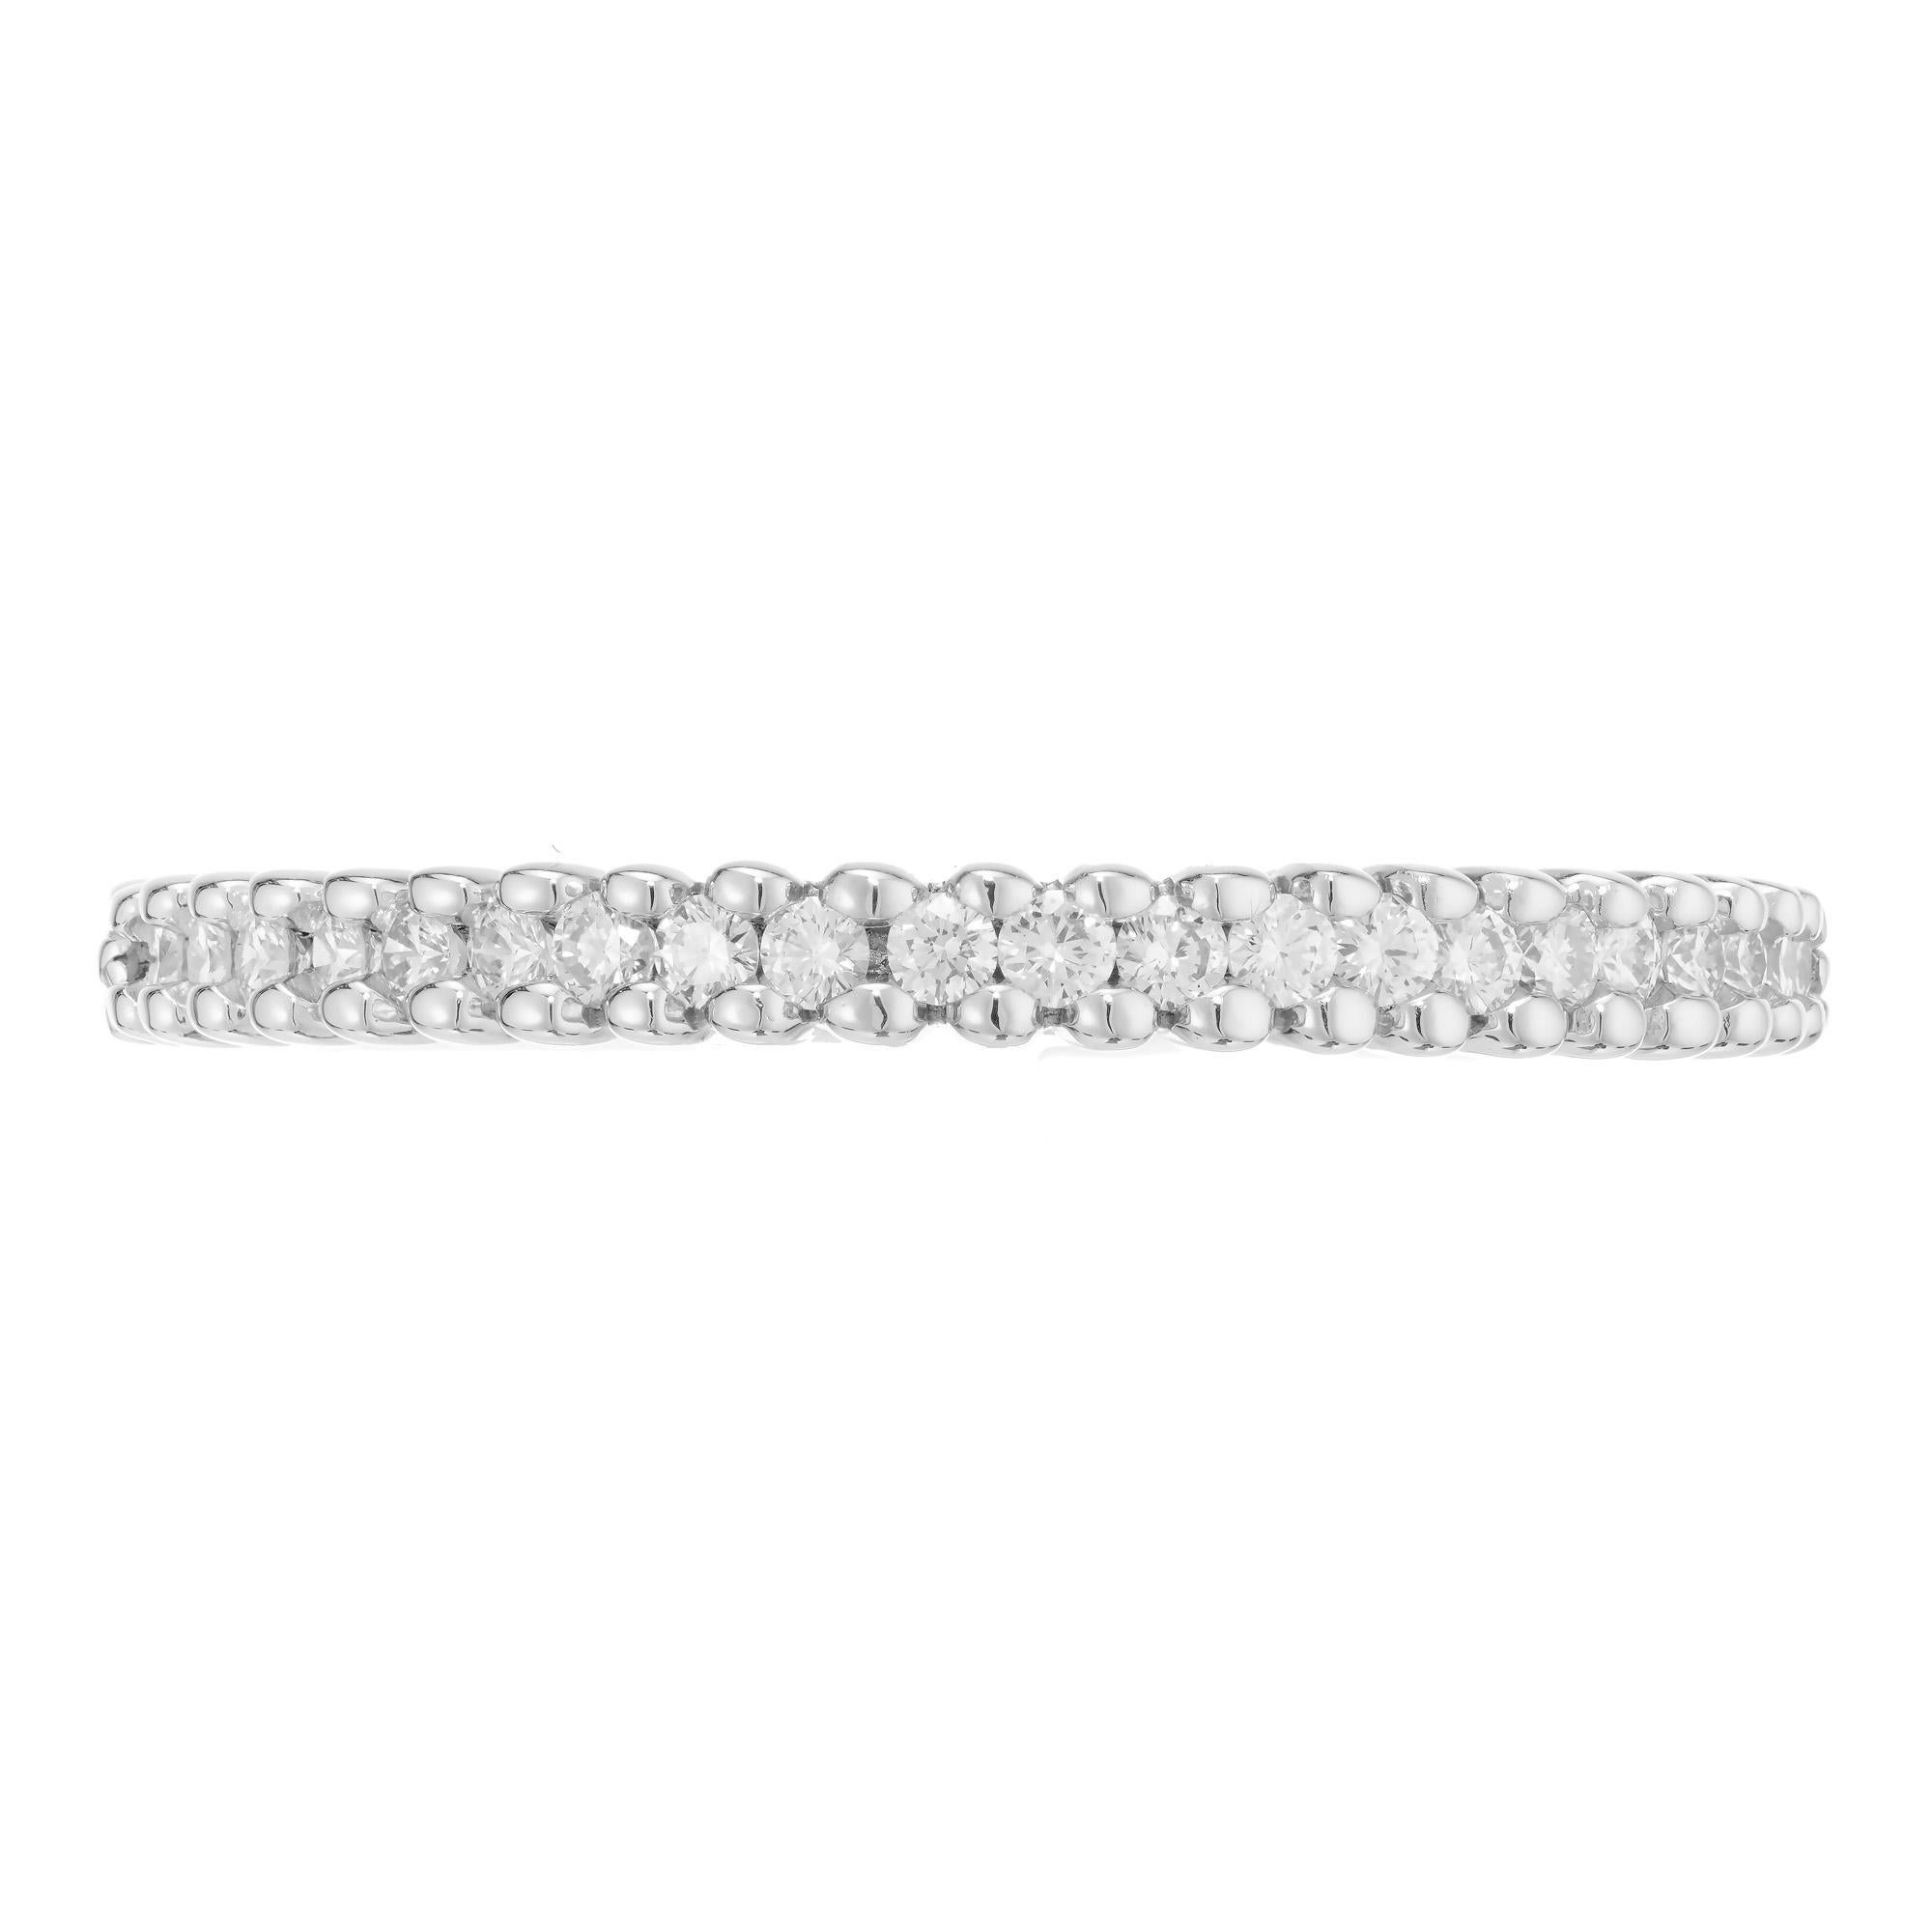 Hildago 18k white gold wedding band with .30cts of brilliant cut diamonds

21 round brillinat cut diamonds, G-H VS approx. .30cts
Size 6.25 and sizable
18k white gold
Stamped: 750
Hallmark: Hidalago
2.3 grams
Width at top: 2.2mm
Height at top: